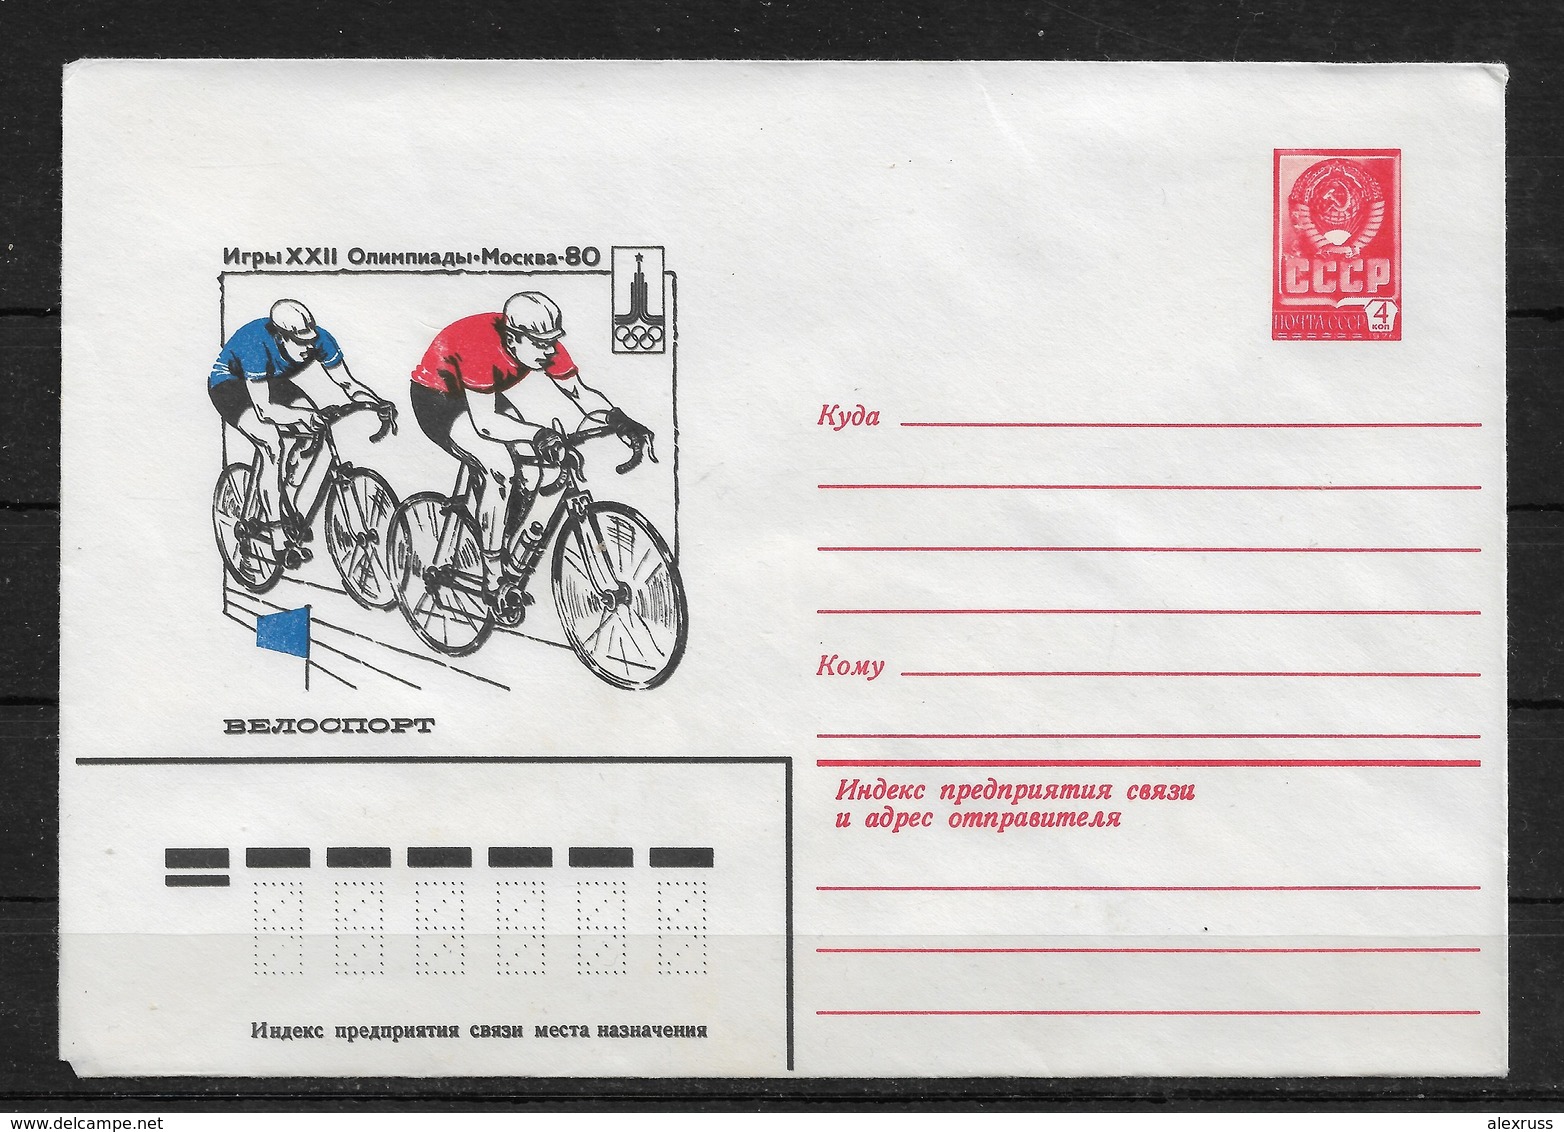 Russia/USSR 1980,Cachet Cover, Moscow'80 Olympics, Cycling,VF Unused ! (NR50) - Cycling